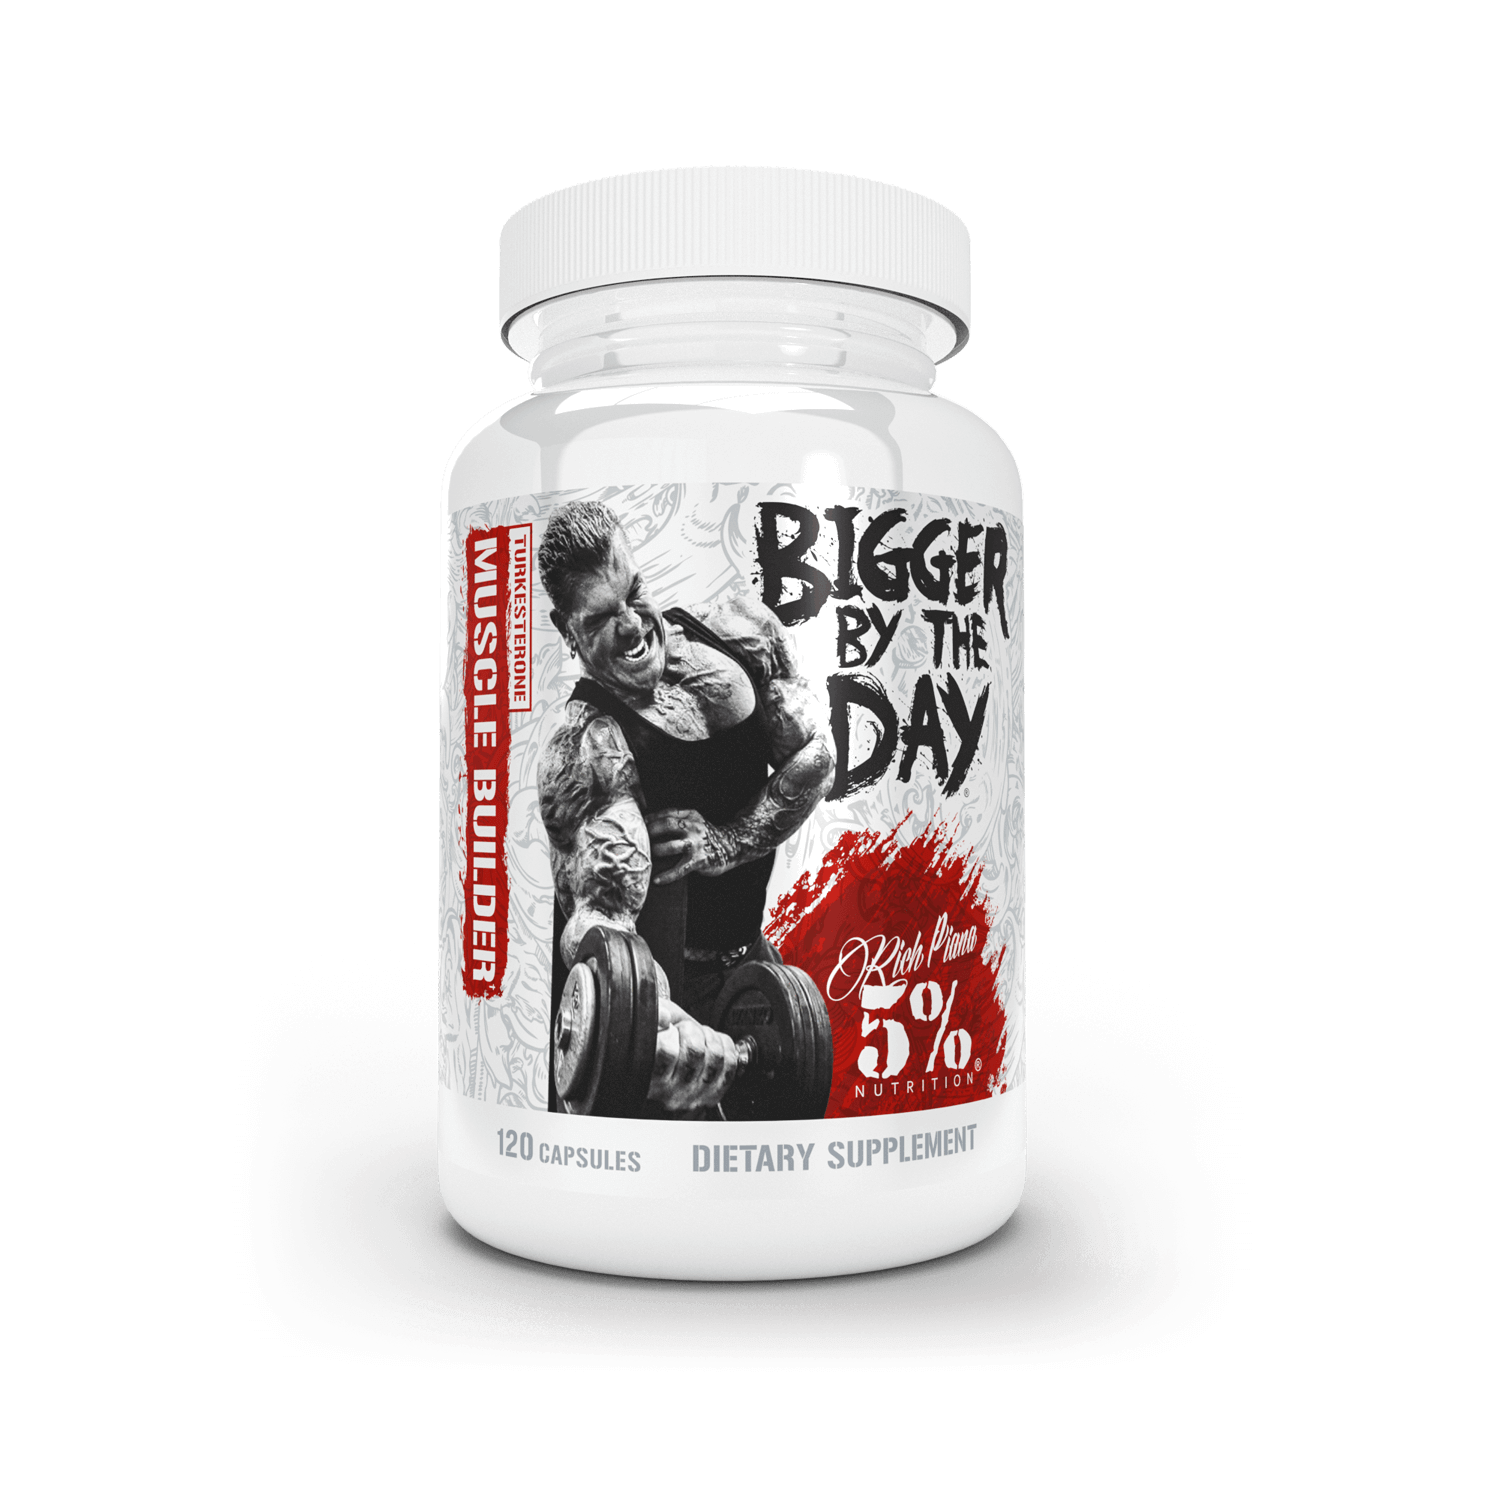 5% NUTRITION BIGGER BY THE DAY 120 CAPSULES